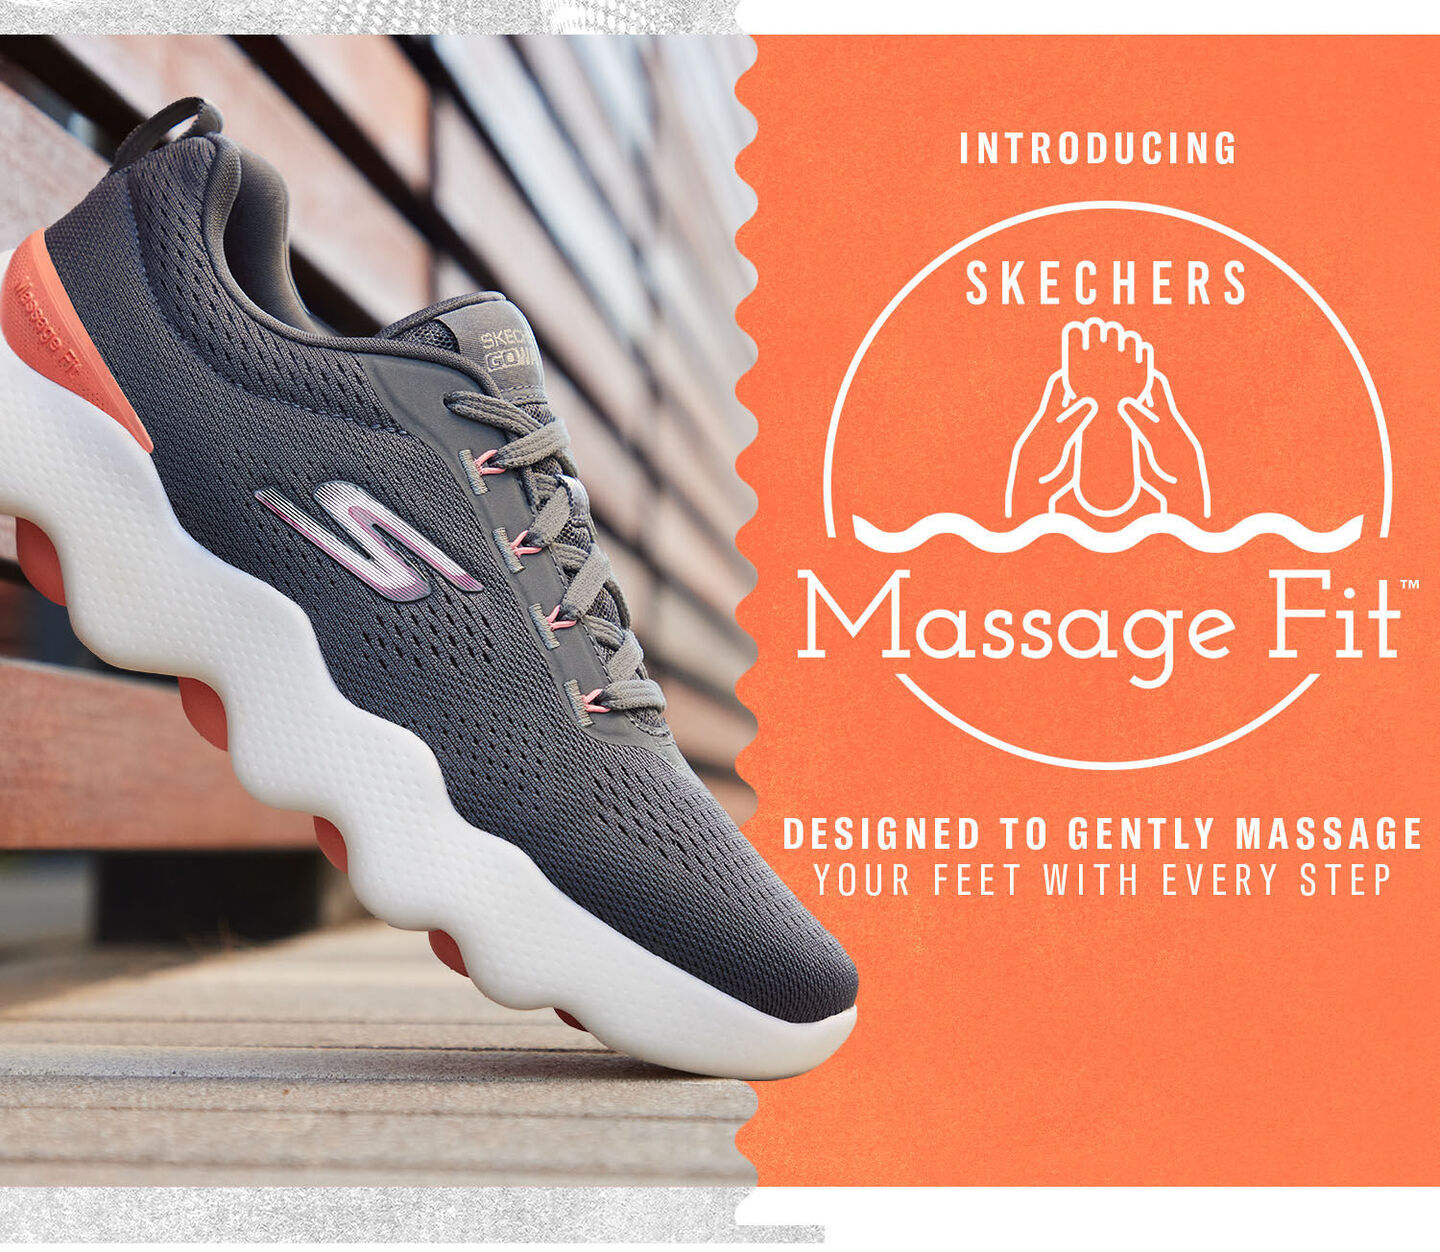 Skechers Massage Fit - Designed to Gently Massage Your Feet with Every Step image